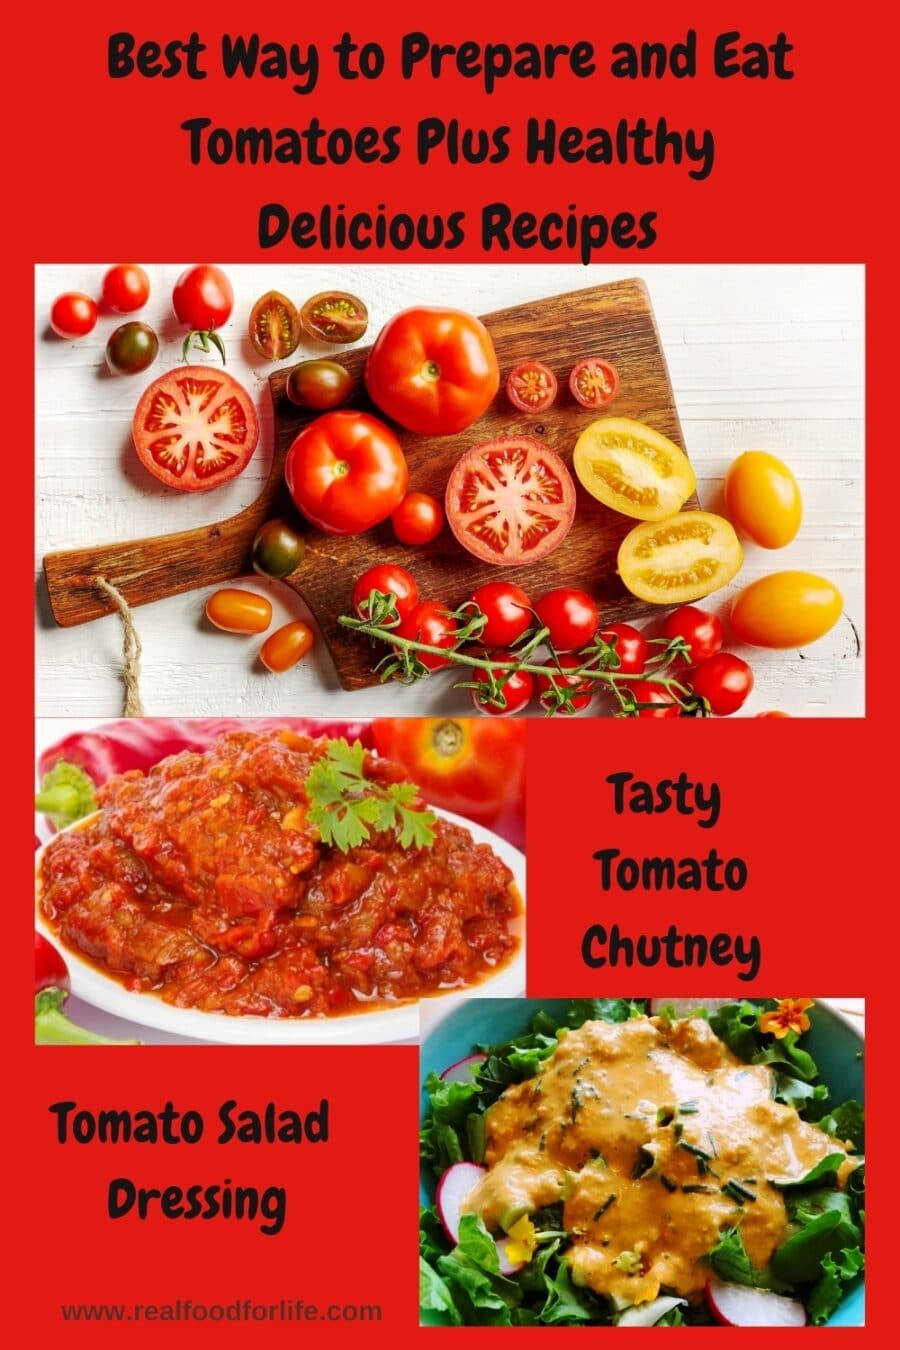 Best Way to Prepare and Eat Tomatoes